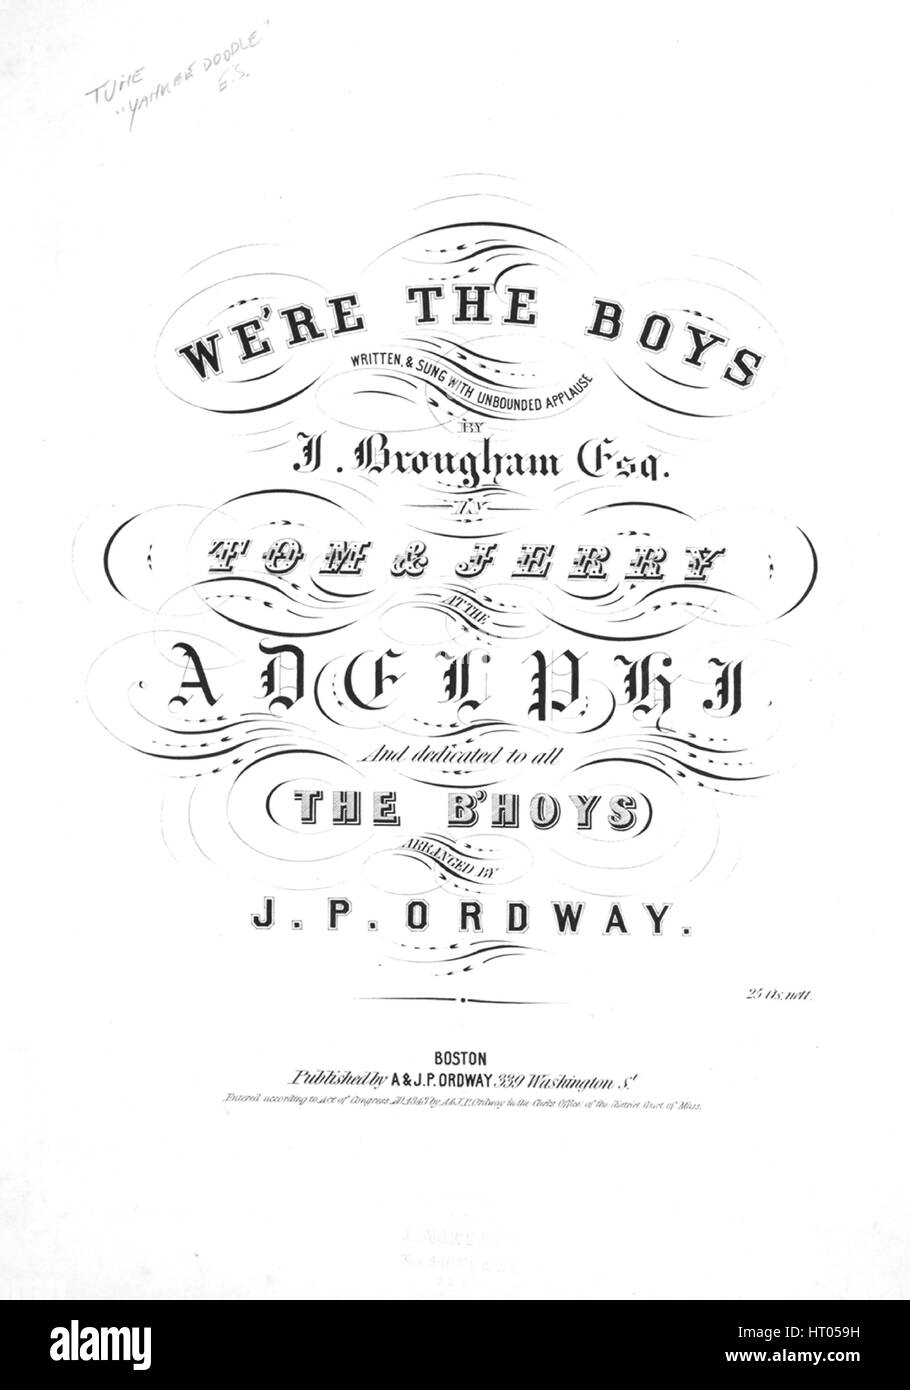 Sheet Music Cover Image Of The Song We Re The Boys Tune Yankee Doodle Dandy With Original Authorship Notes Reading Written By J Brougham Esq Arranged By Jp Ordway United States 1843 The